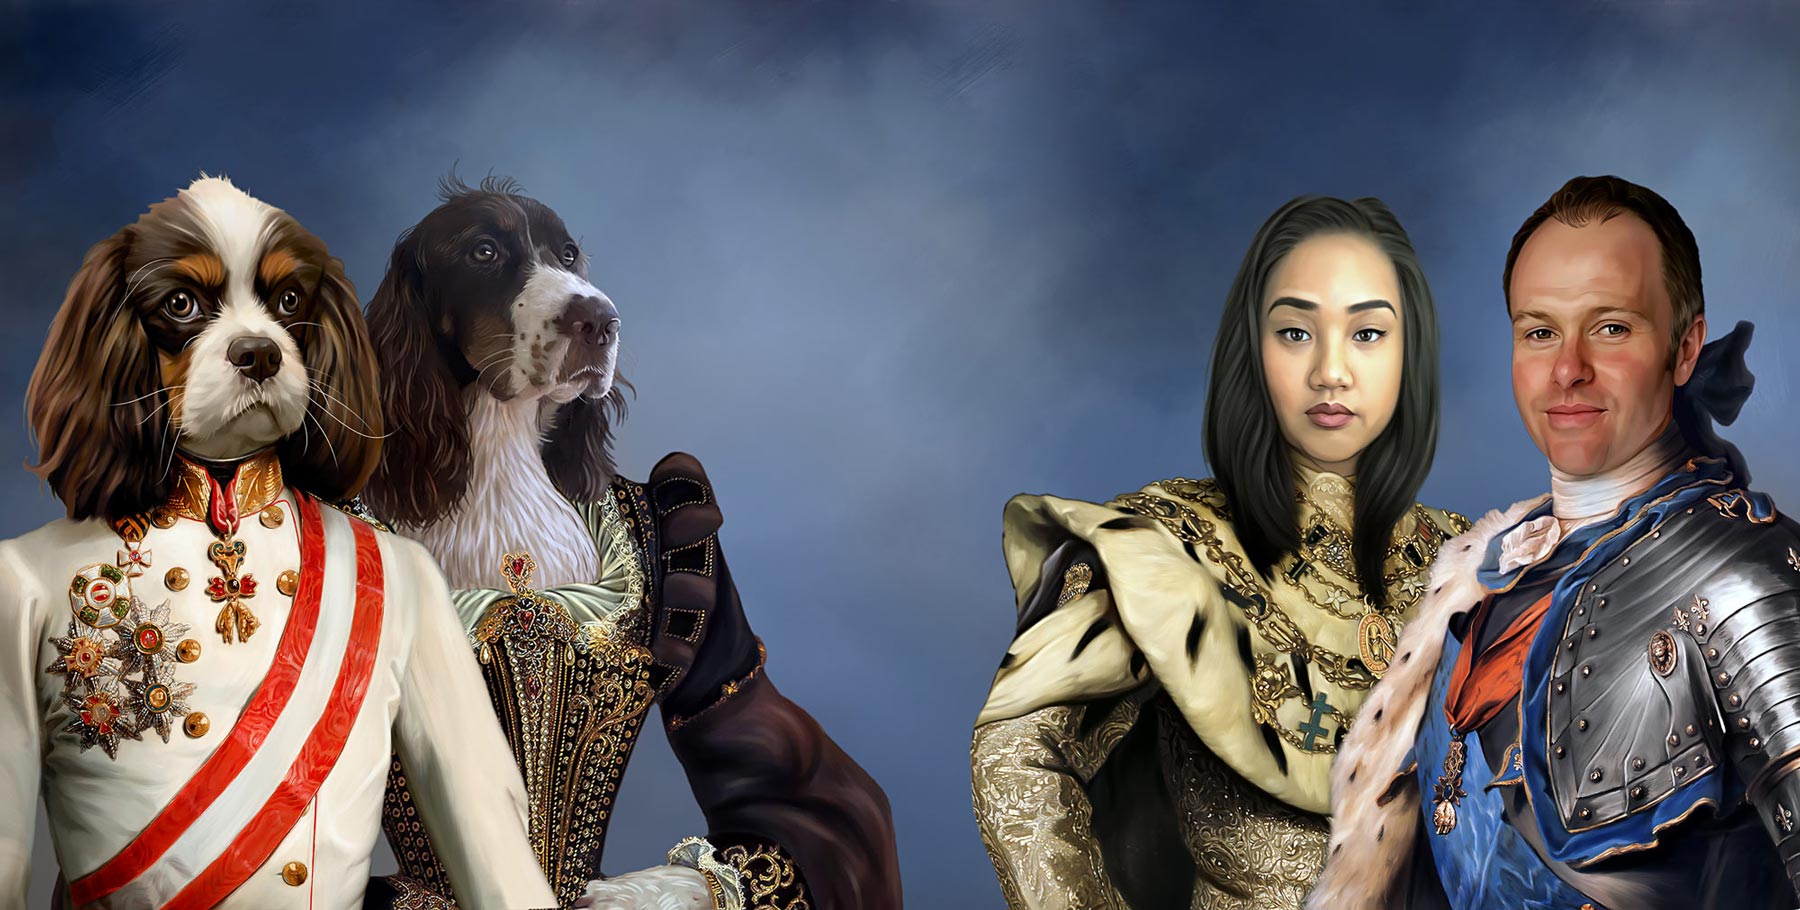 Custom royal portrait of people and pets painted from reference photos